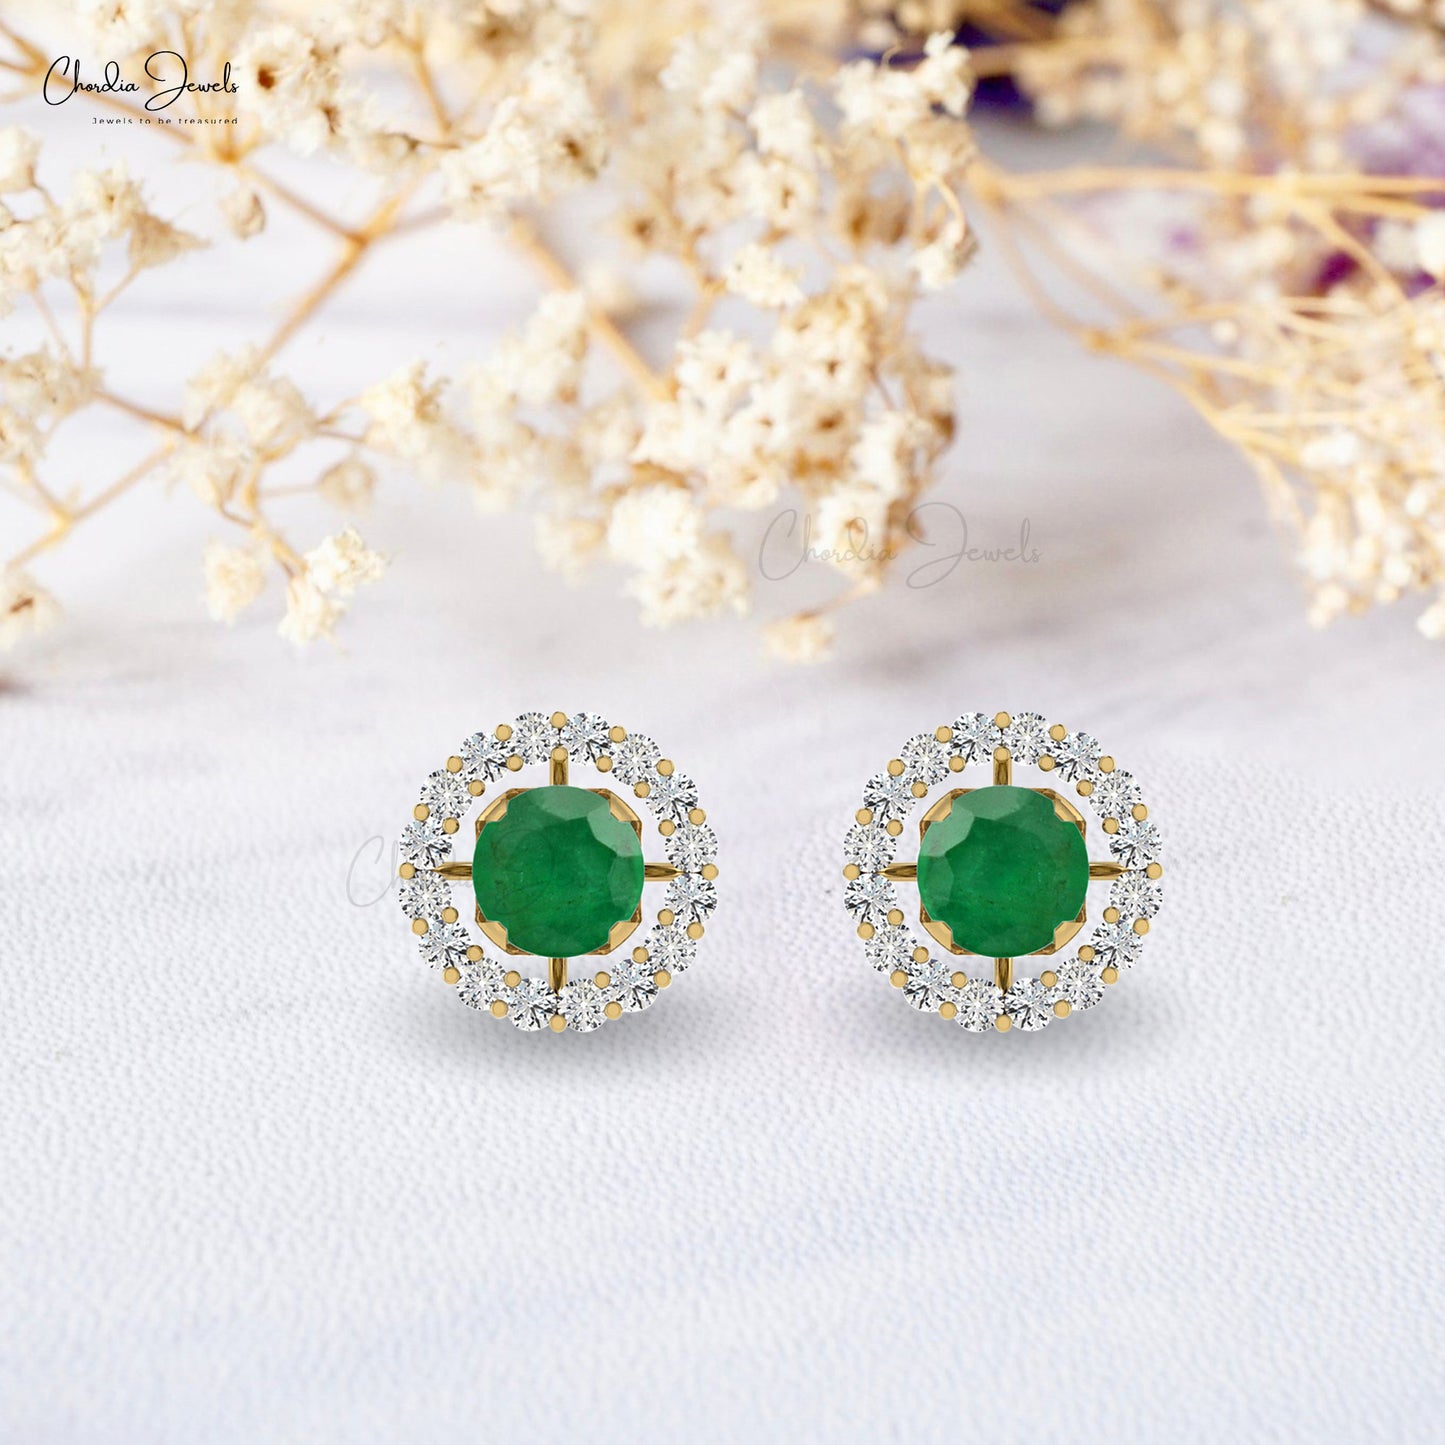 Make a statement with these emerald halo earrings.